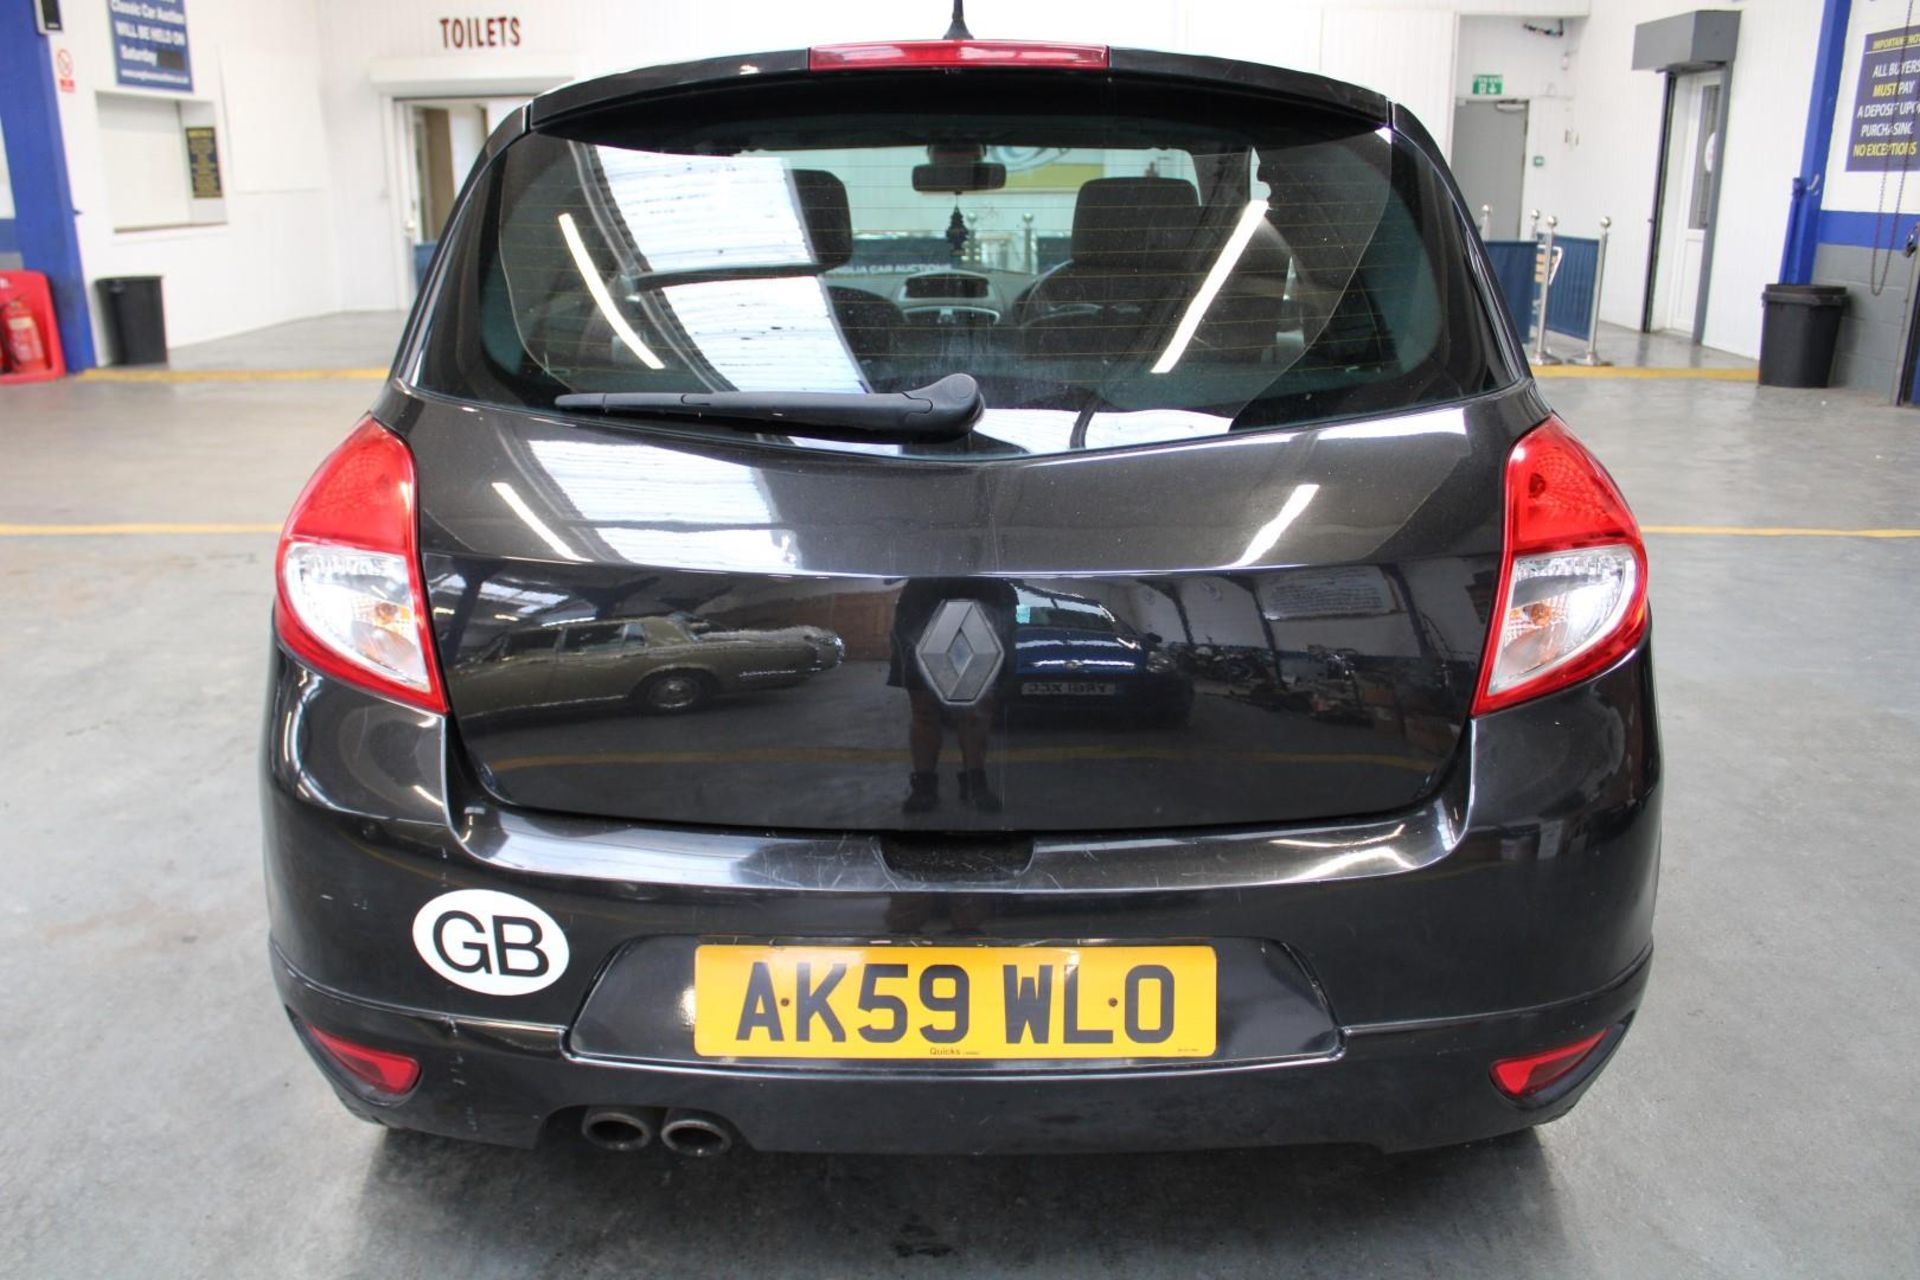 59 09 Renault Clio GT - Image 27 of 31